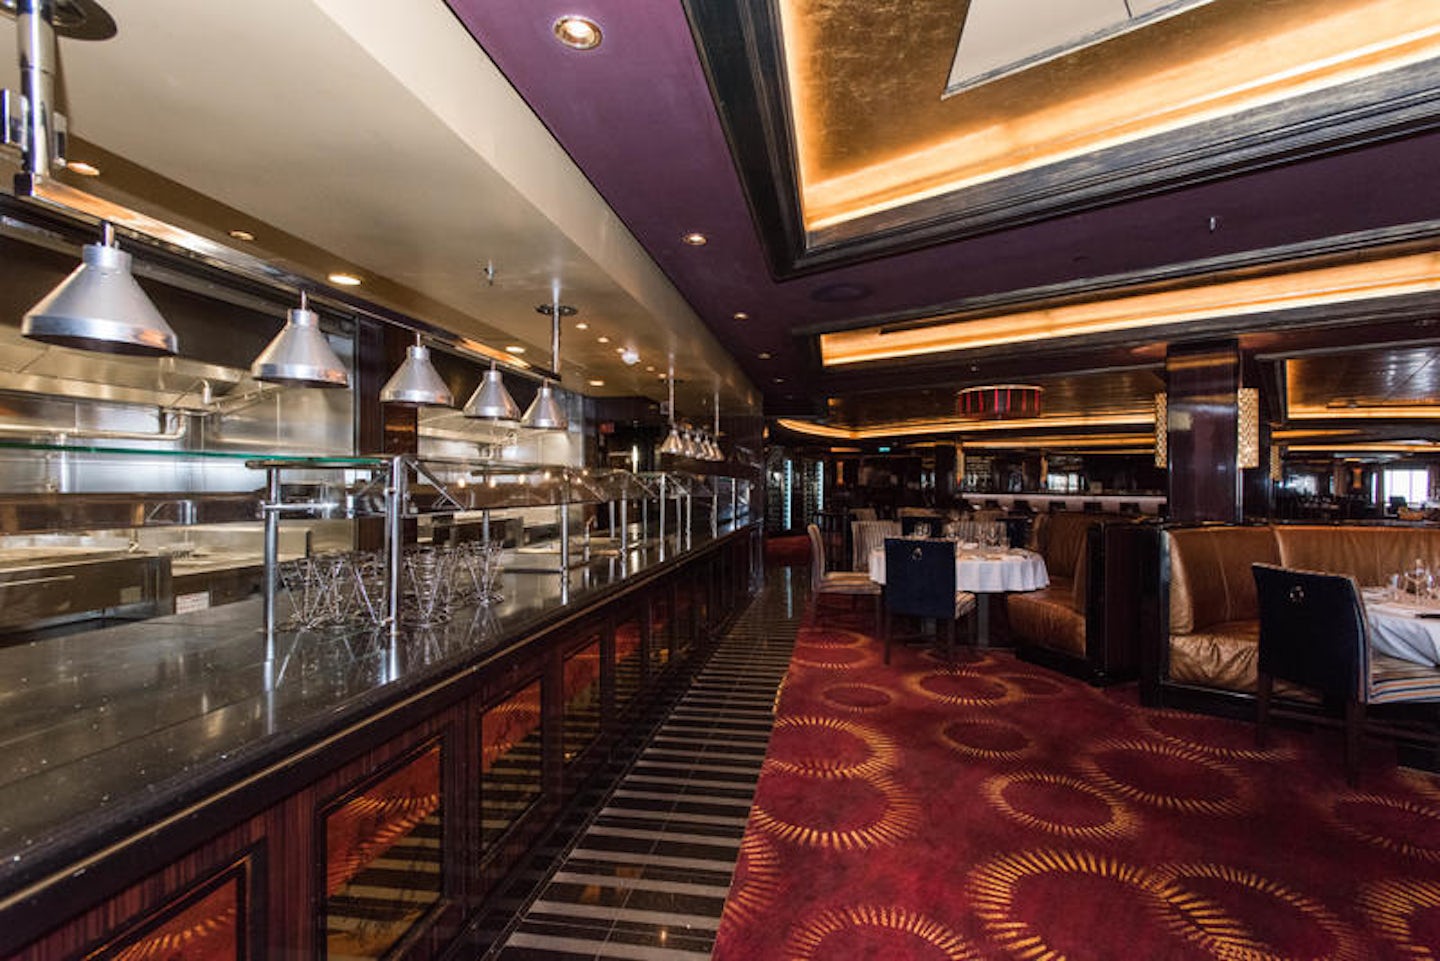 Moderno Churrascaria and Cagney's Steakhouse on Norwegian Epic